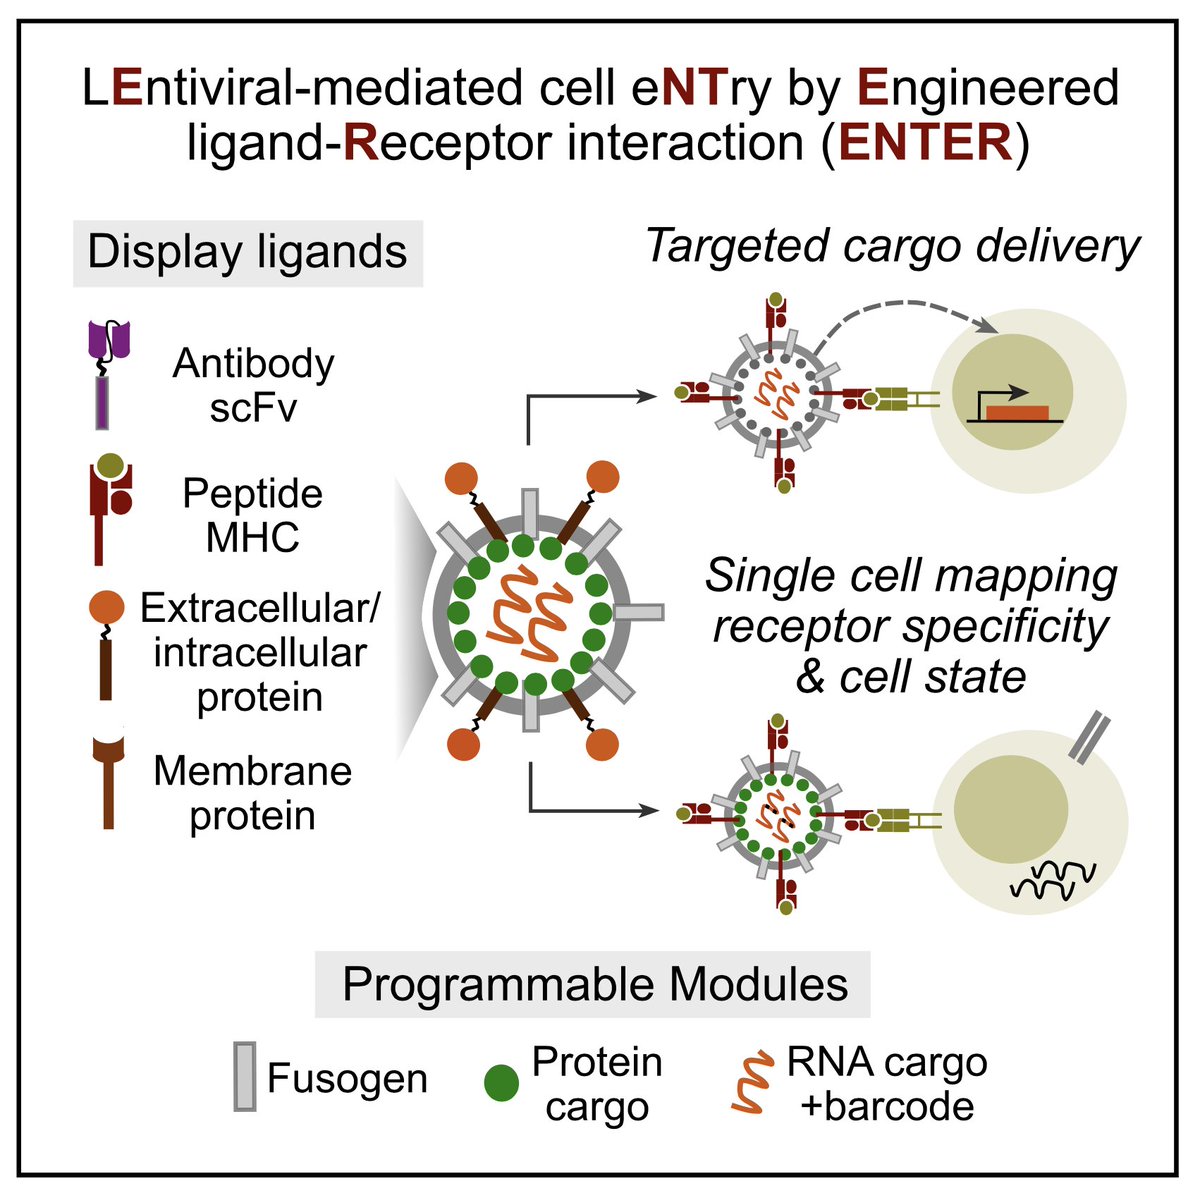 Our work on ENTER is finally out @CellCellPress! Like📱that can 📷📞🎧, ENTER is a modular viral platform that unifies multiple applications: ⭐️Decode Ligand-Receptor interaction ⭐️Receptor-specific cargo delivery ⭐️Link receptor specificity with cell state at single cell